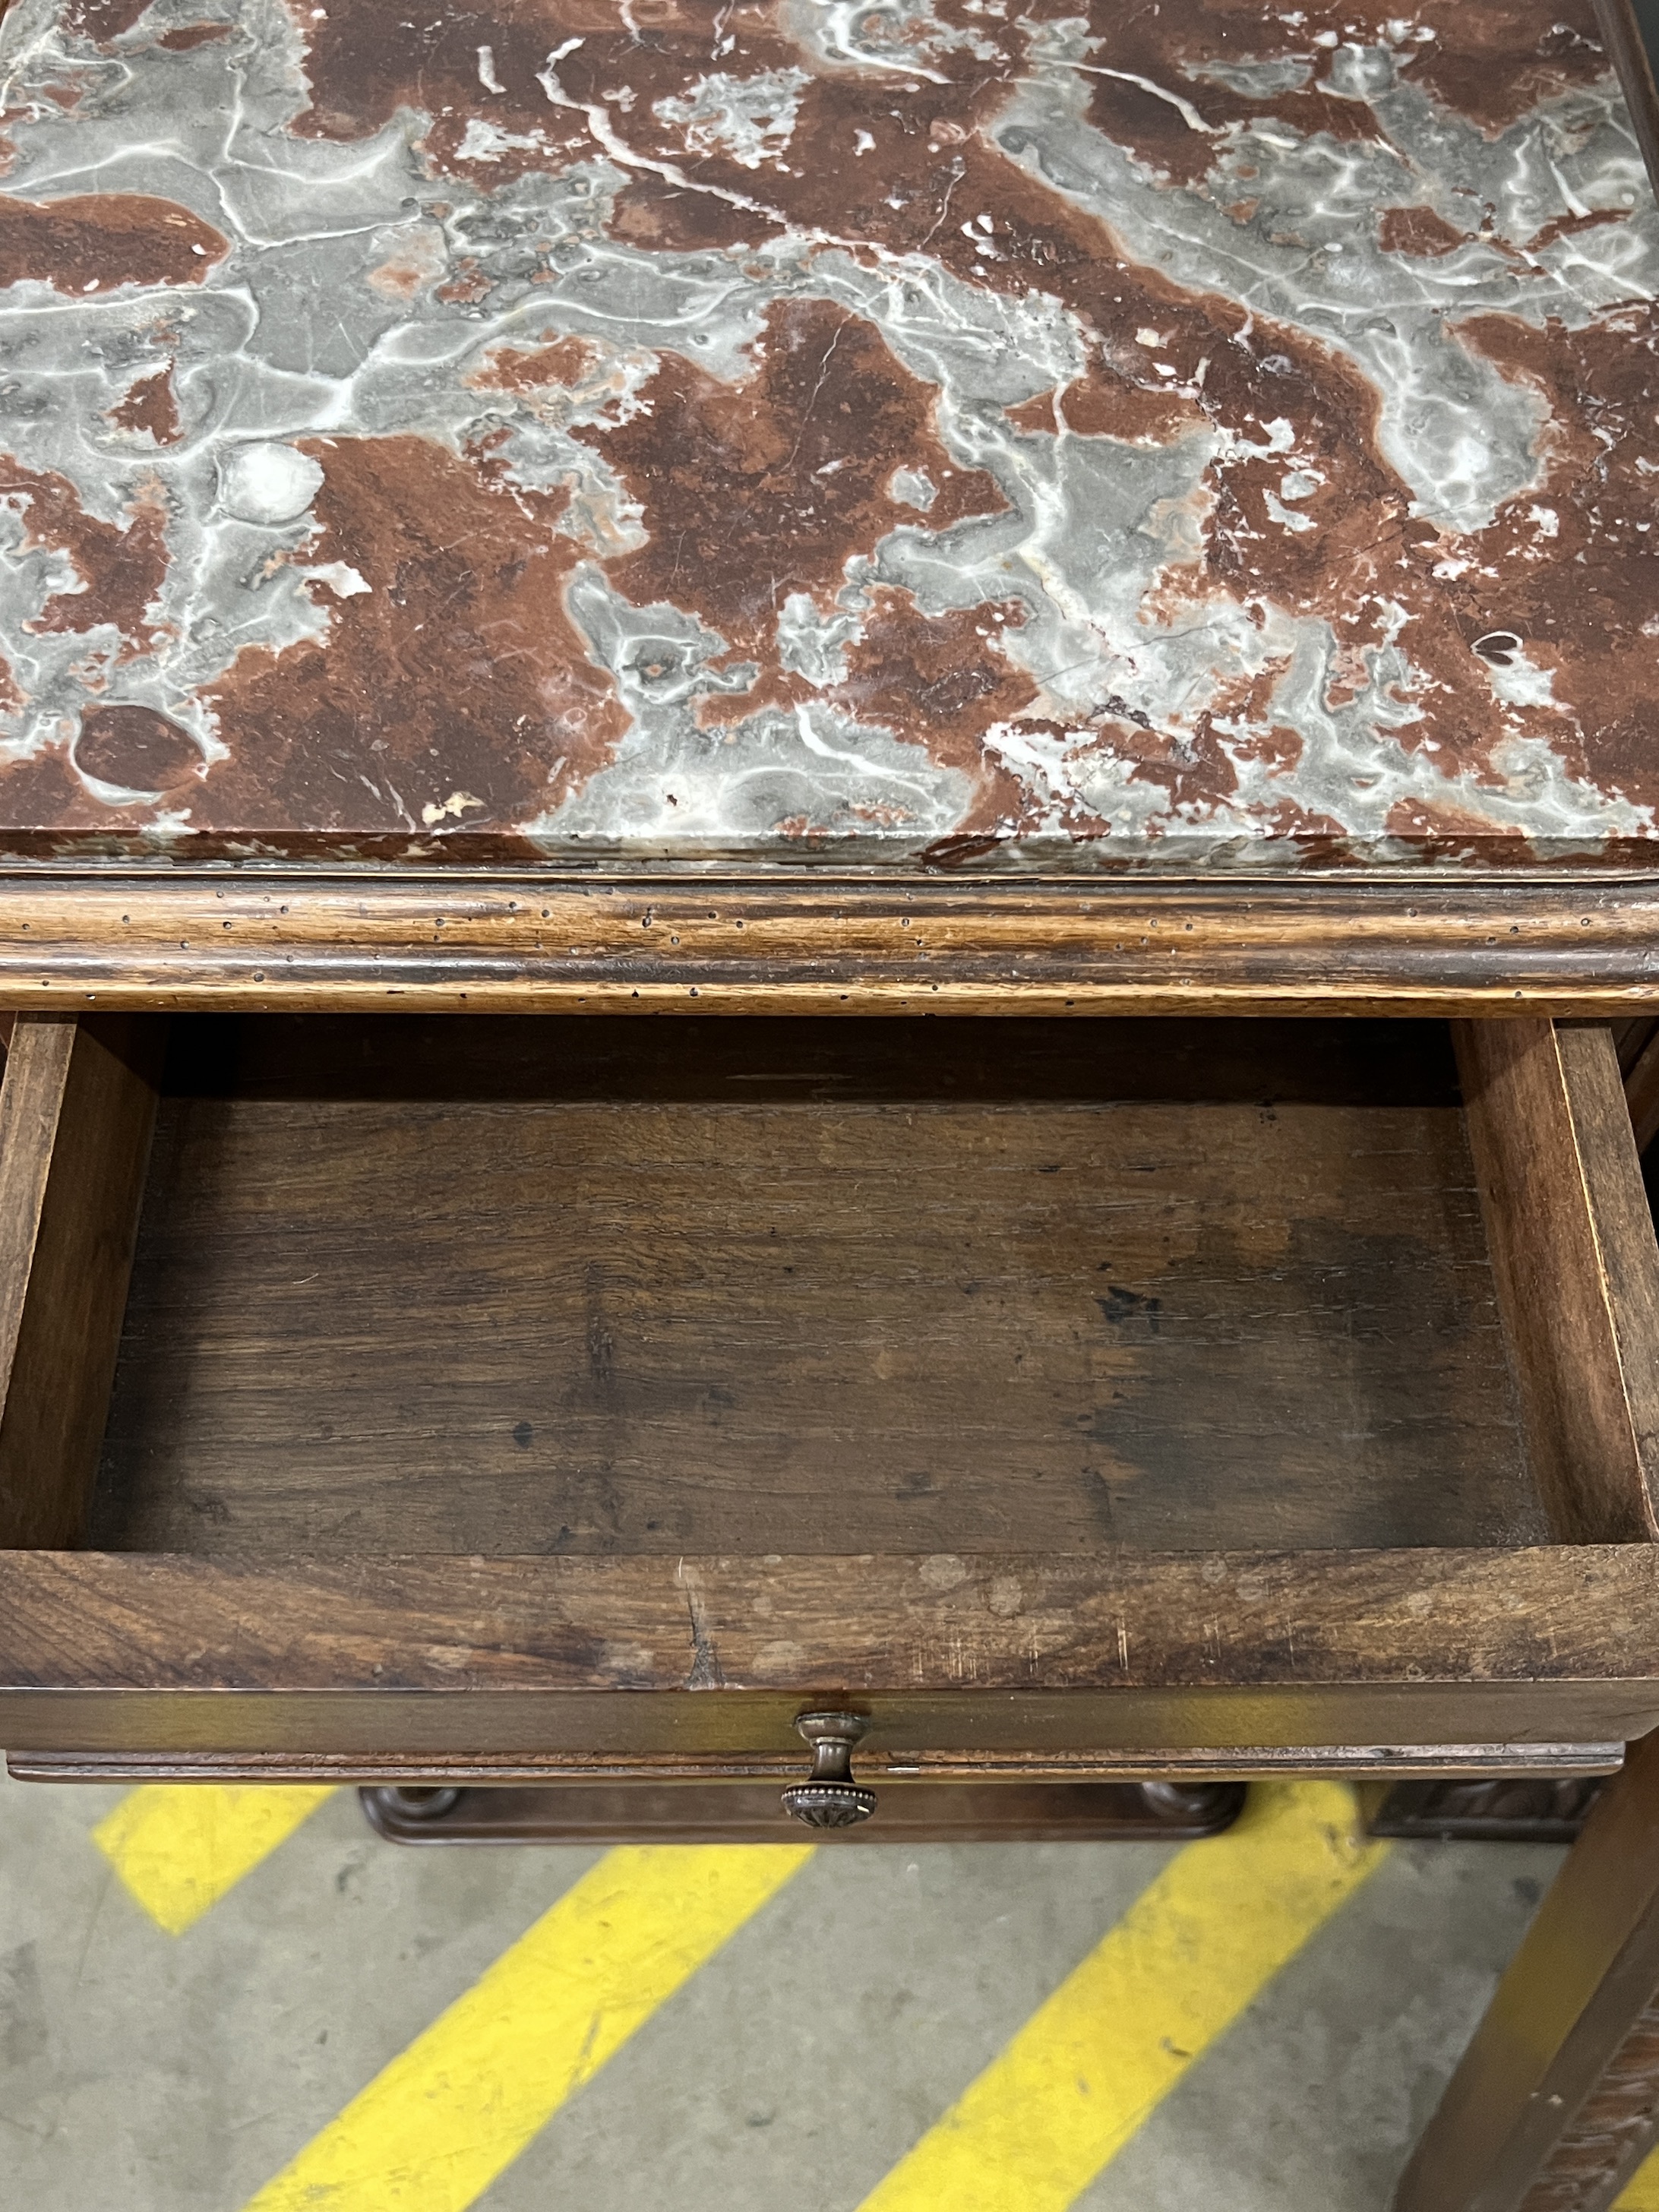 A late 19th century French marble topped walnut bedside cabinet, width 44cm, depth 38cm, height 87cm